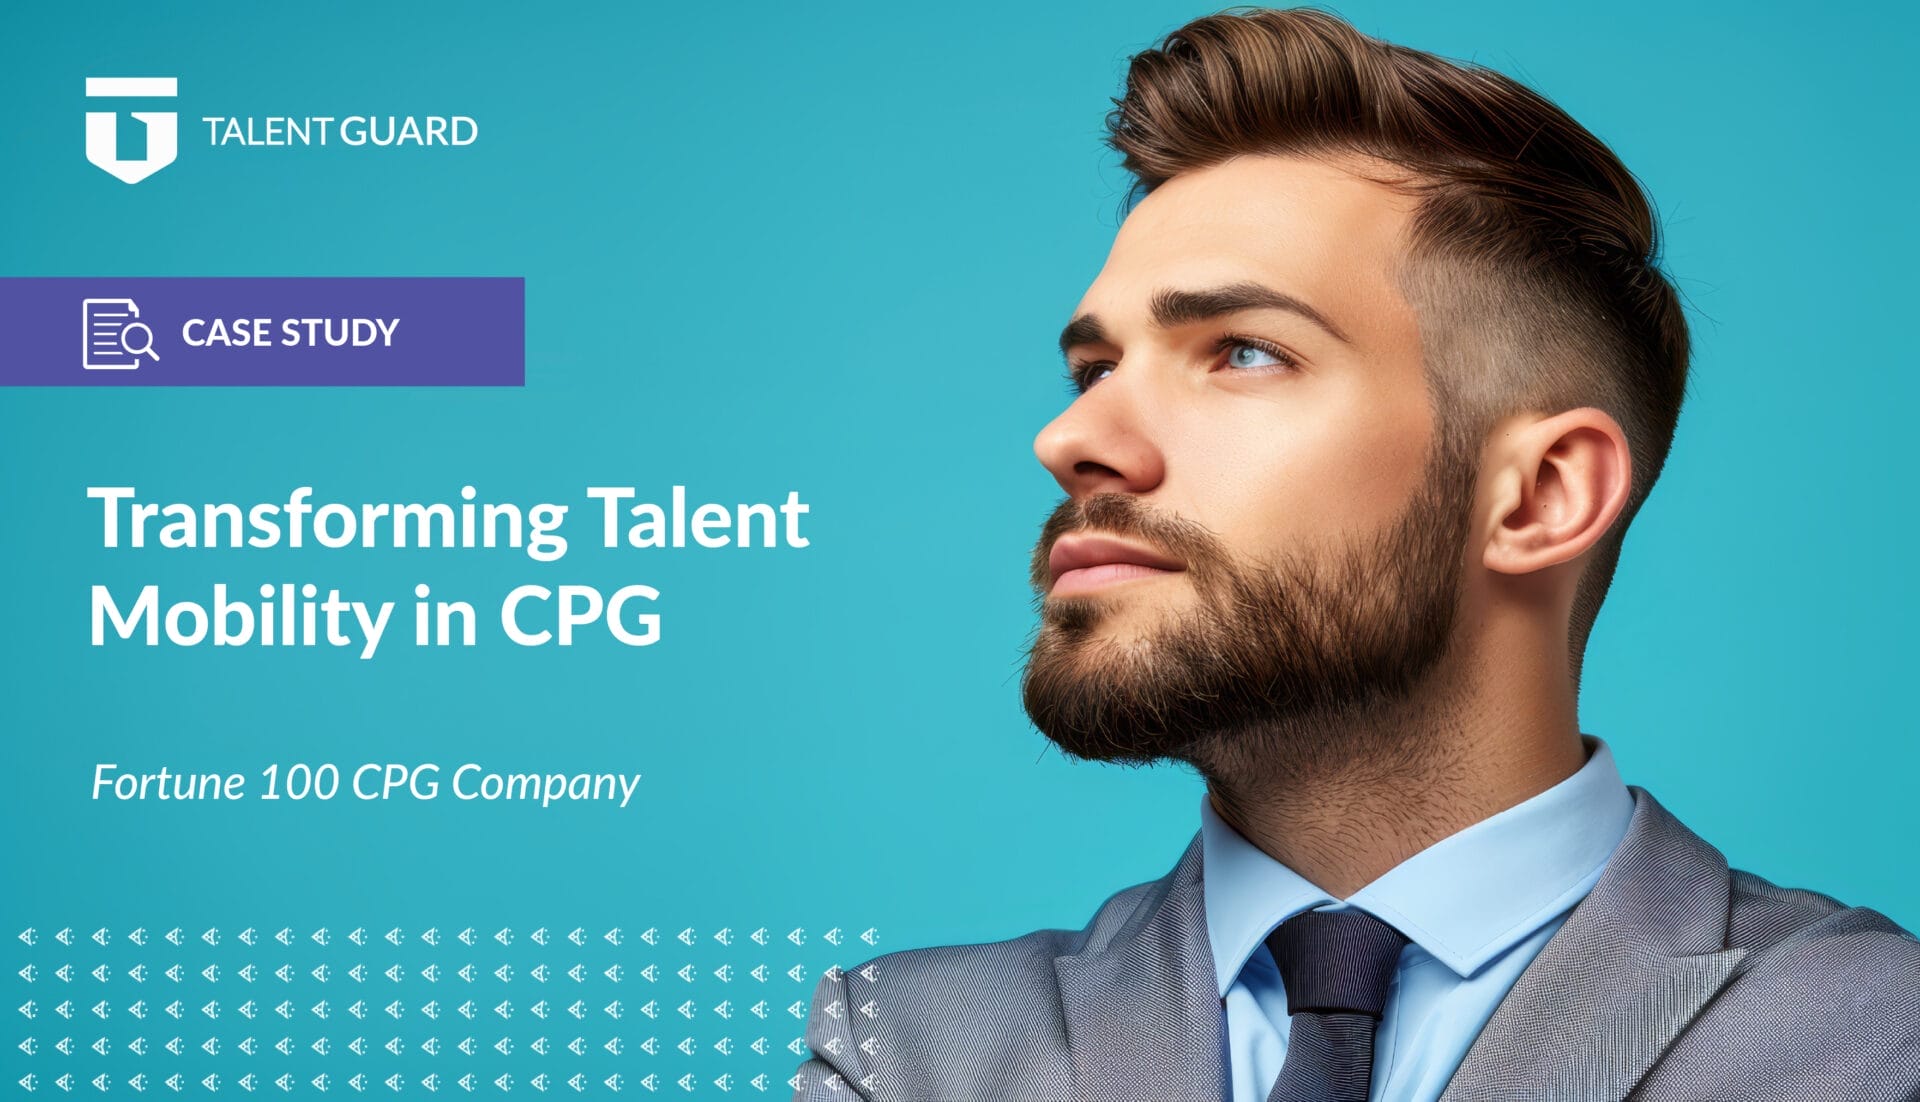 Transforming Talent Mobility in CPG Case Study - TalentGuard